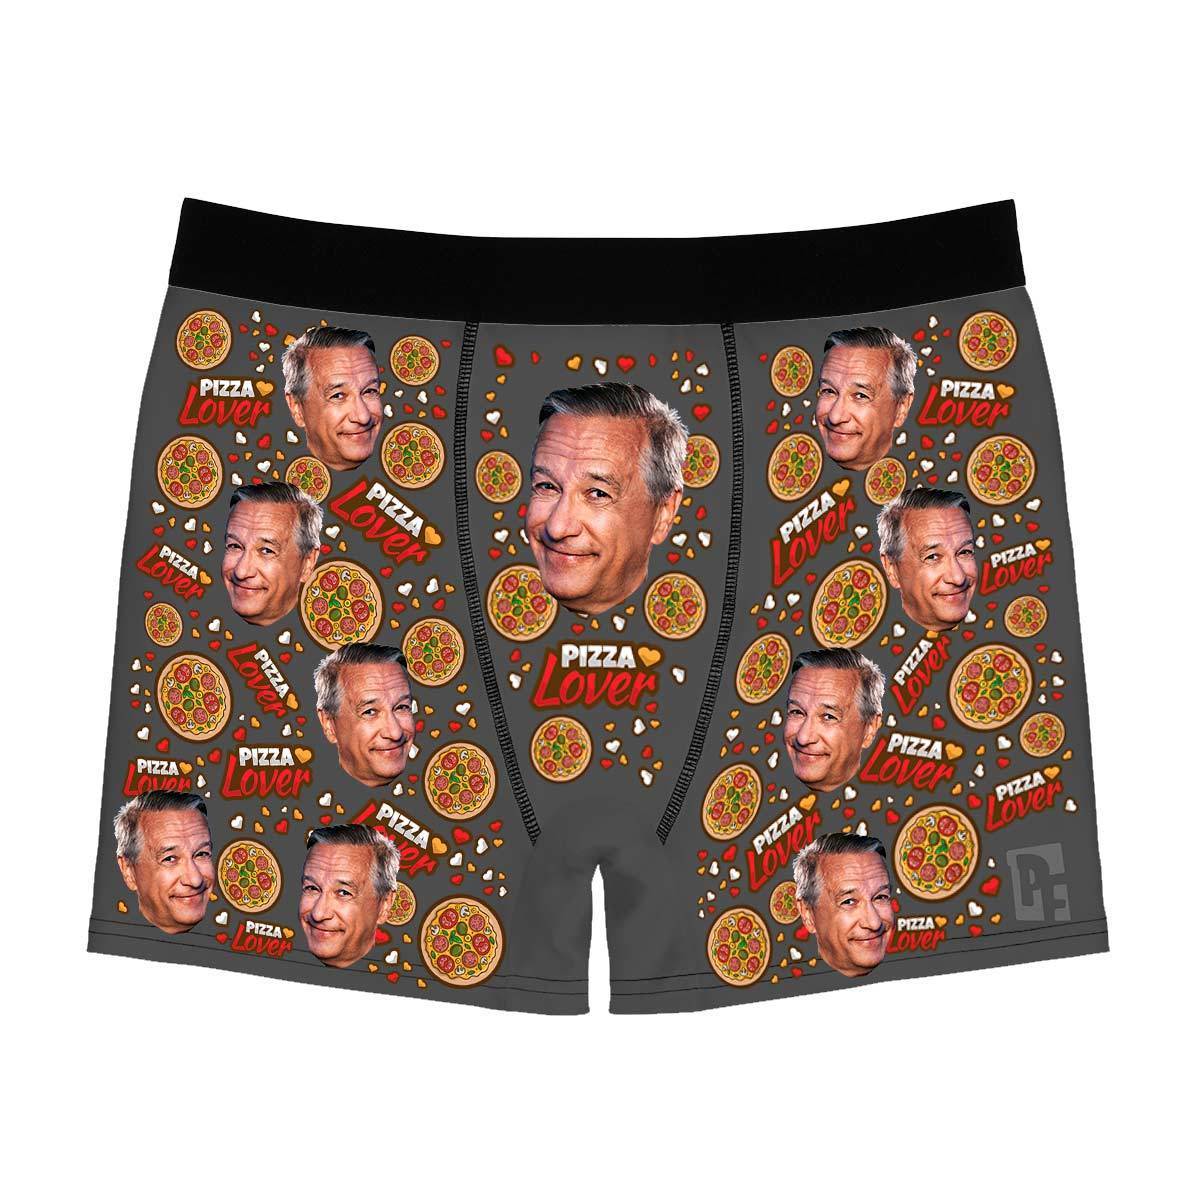 Dark Pizza Lover men's boxer briefs personalized with photo printed on them